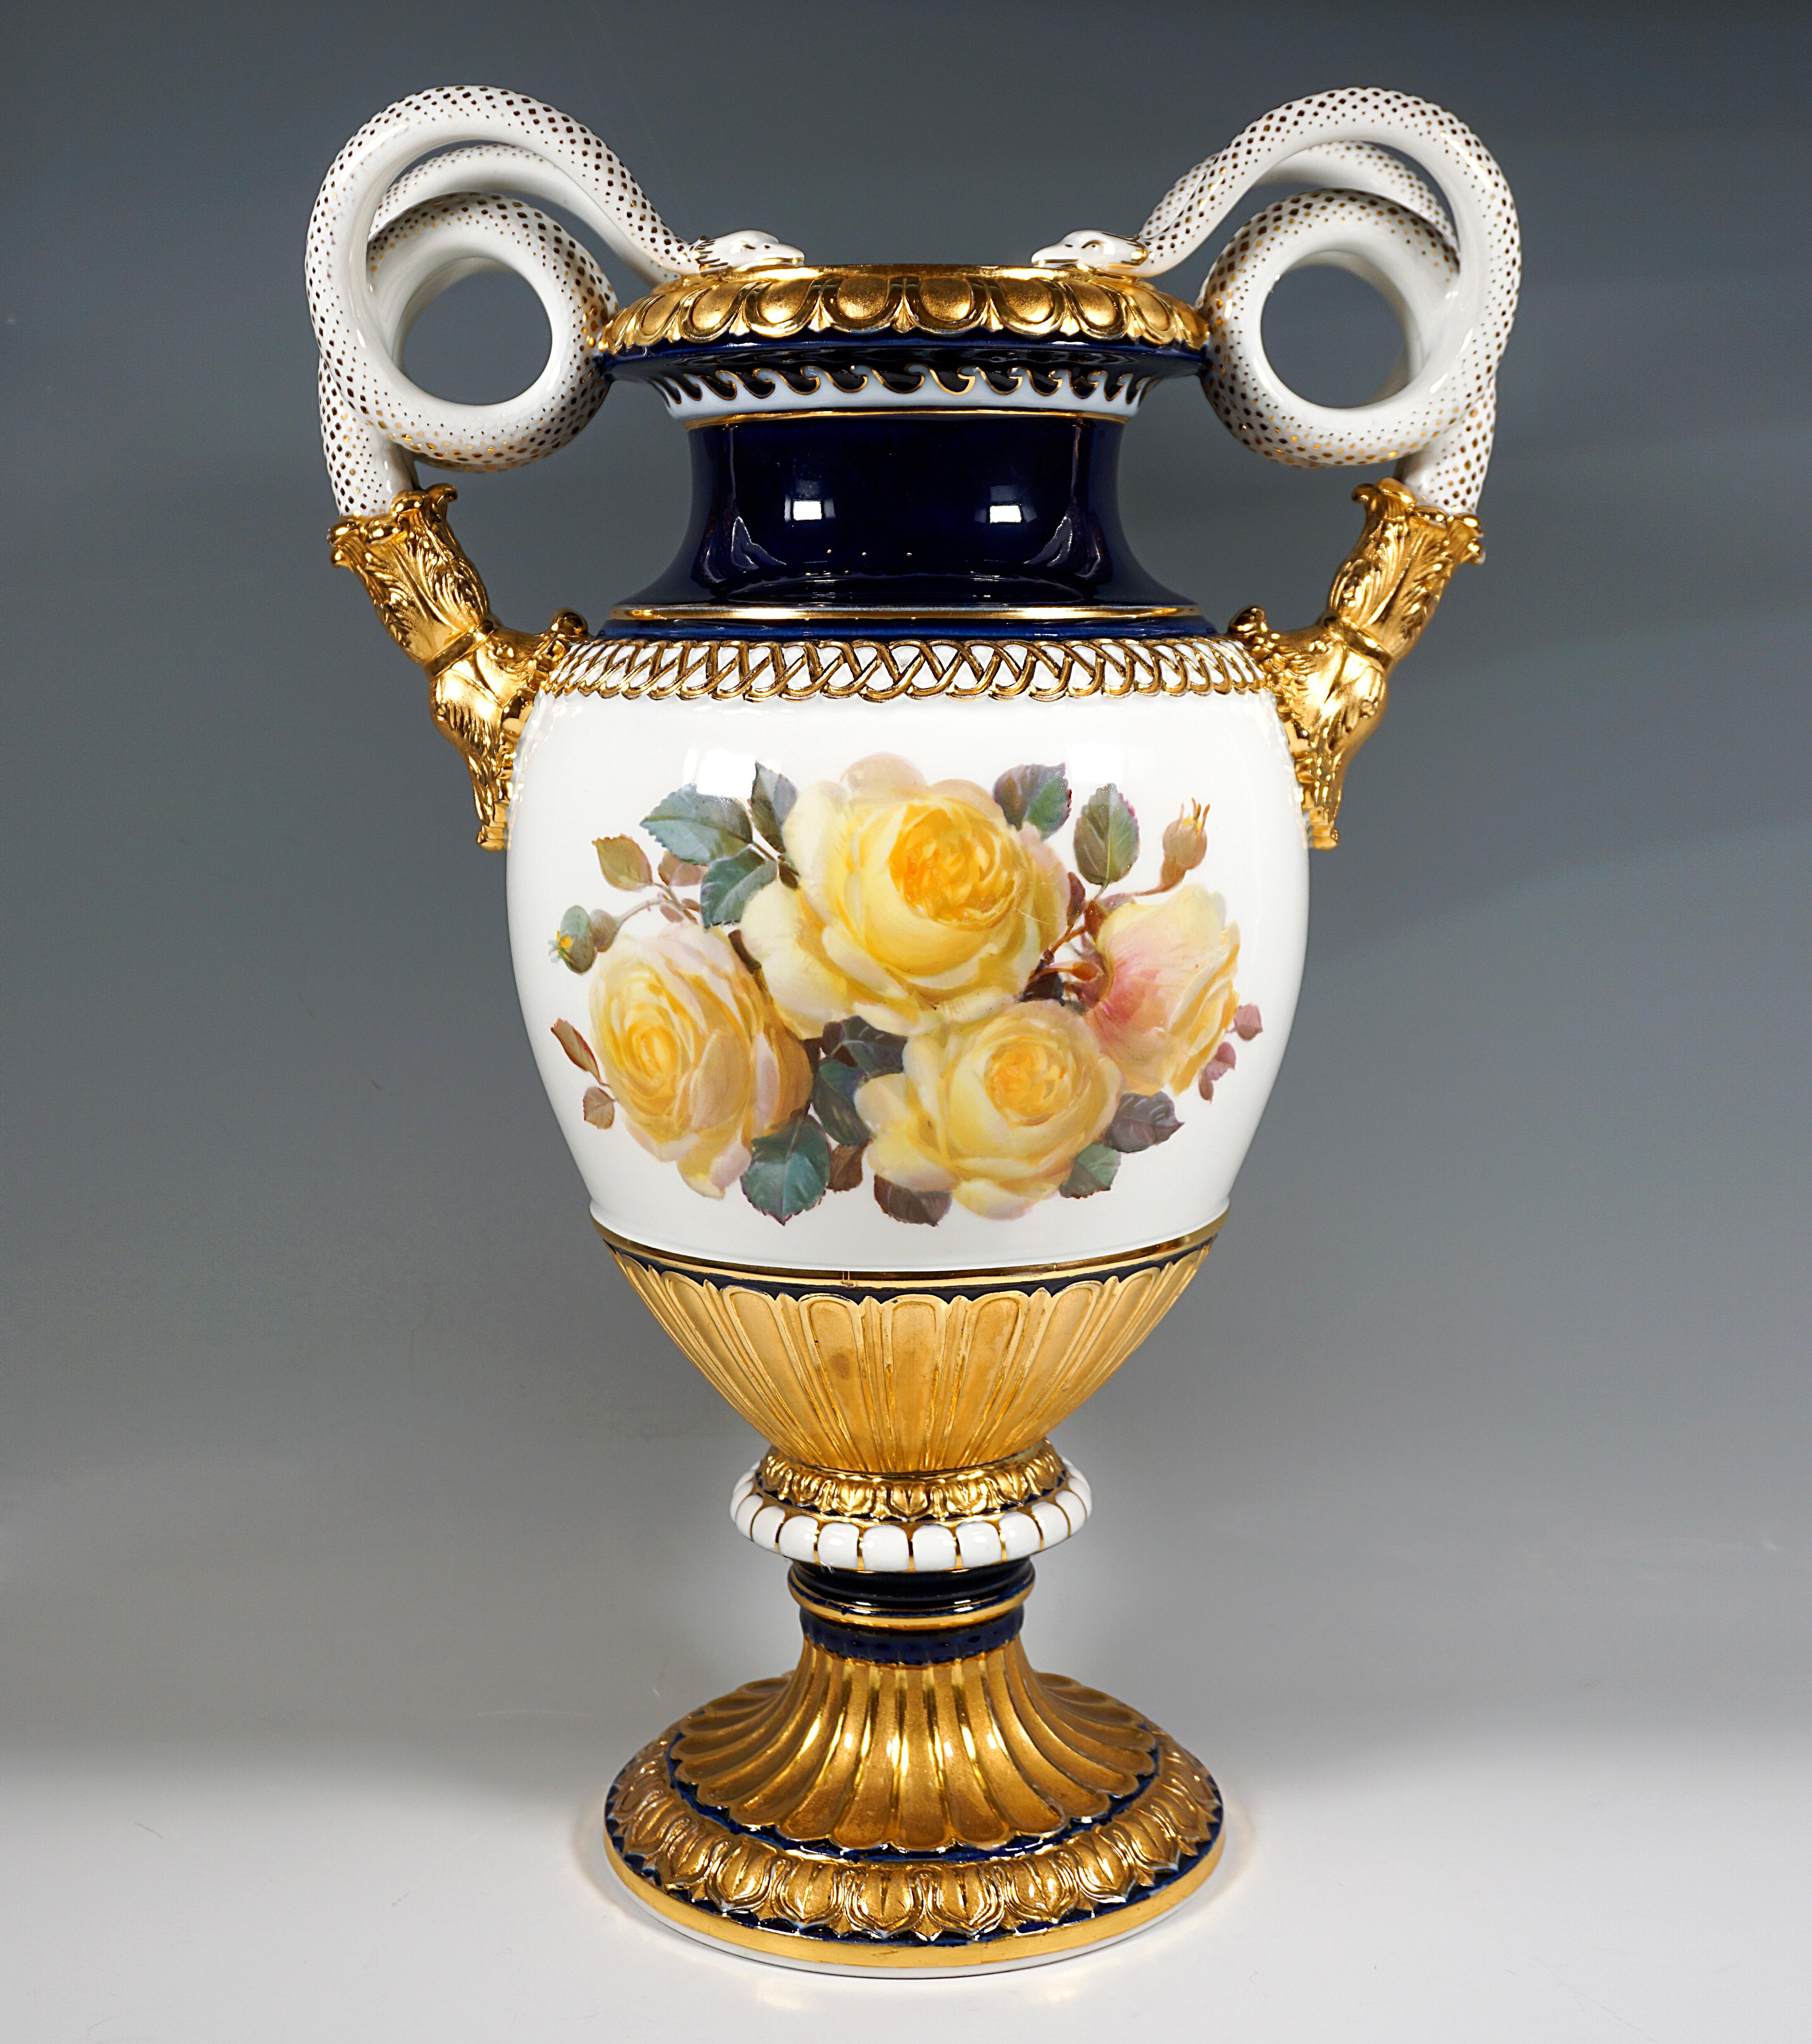 Very large double-snake-handled vase in baluster form on a mounted funnel-shaped base, laterally raised handles in the form of coiled pairs of snakes, white and cobalt-blue background, front and back fine polychrome roses soft painting in purple and